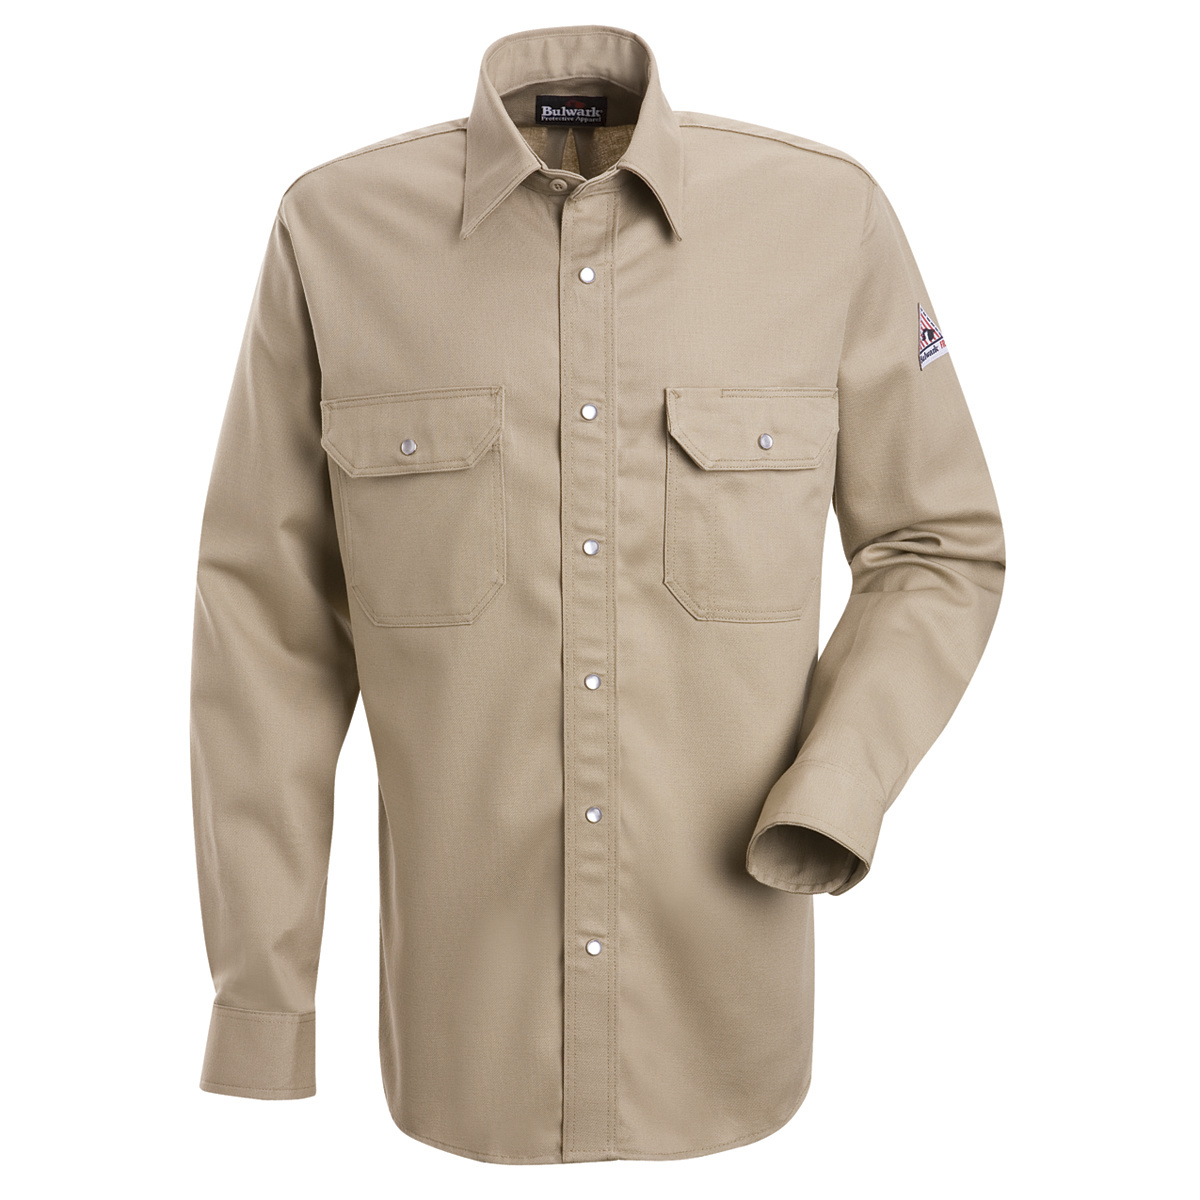 Bulwark® 6X Tall Tan EXCEL FR® Cotton Flame Resistant Uniform Shirt With Snap Front Closure